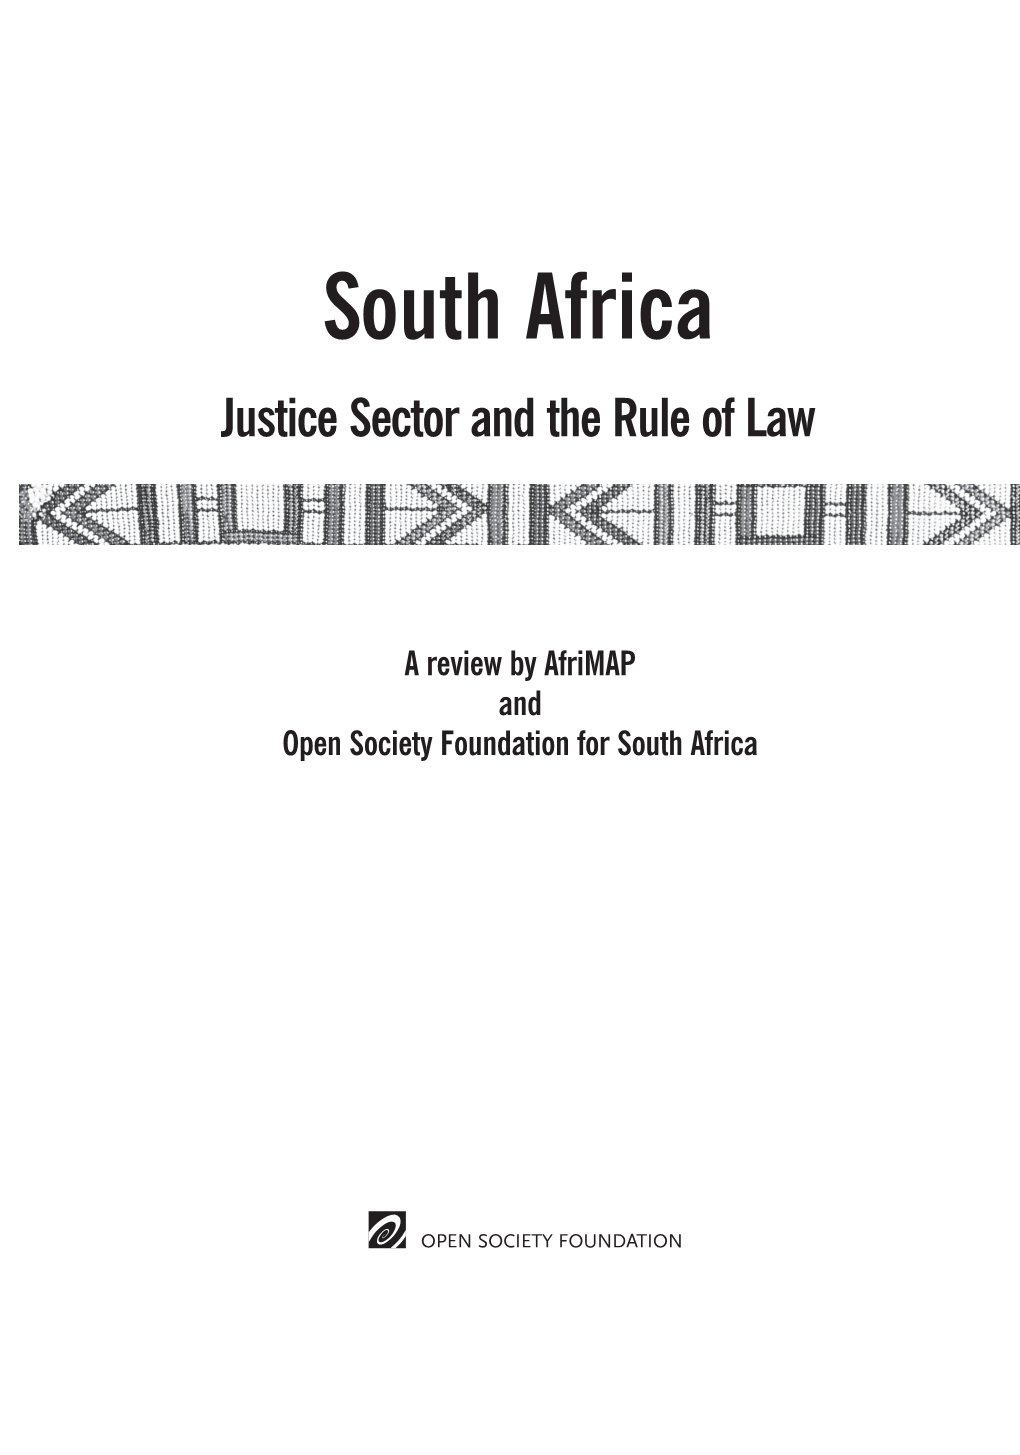 South Africa Justice Sector and the Rule of Law